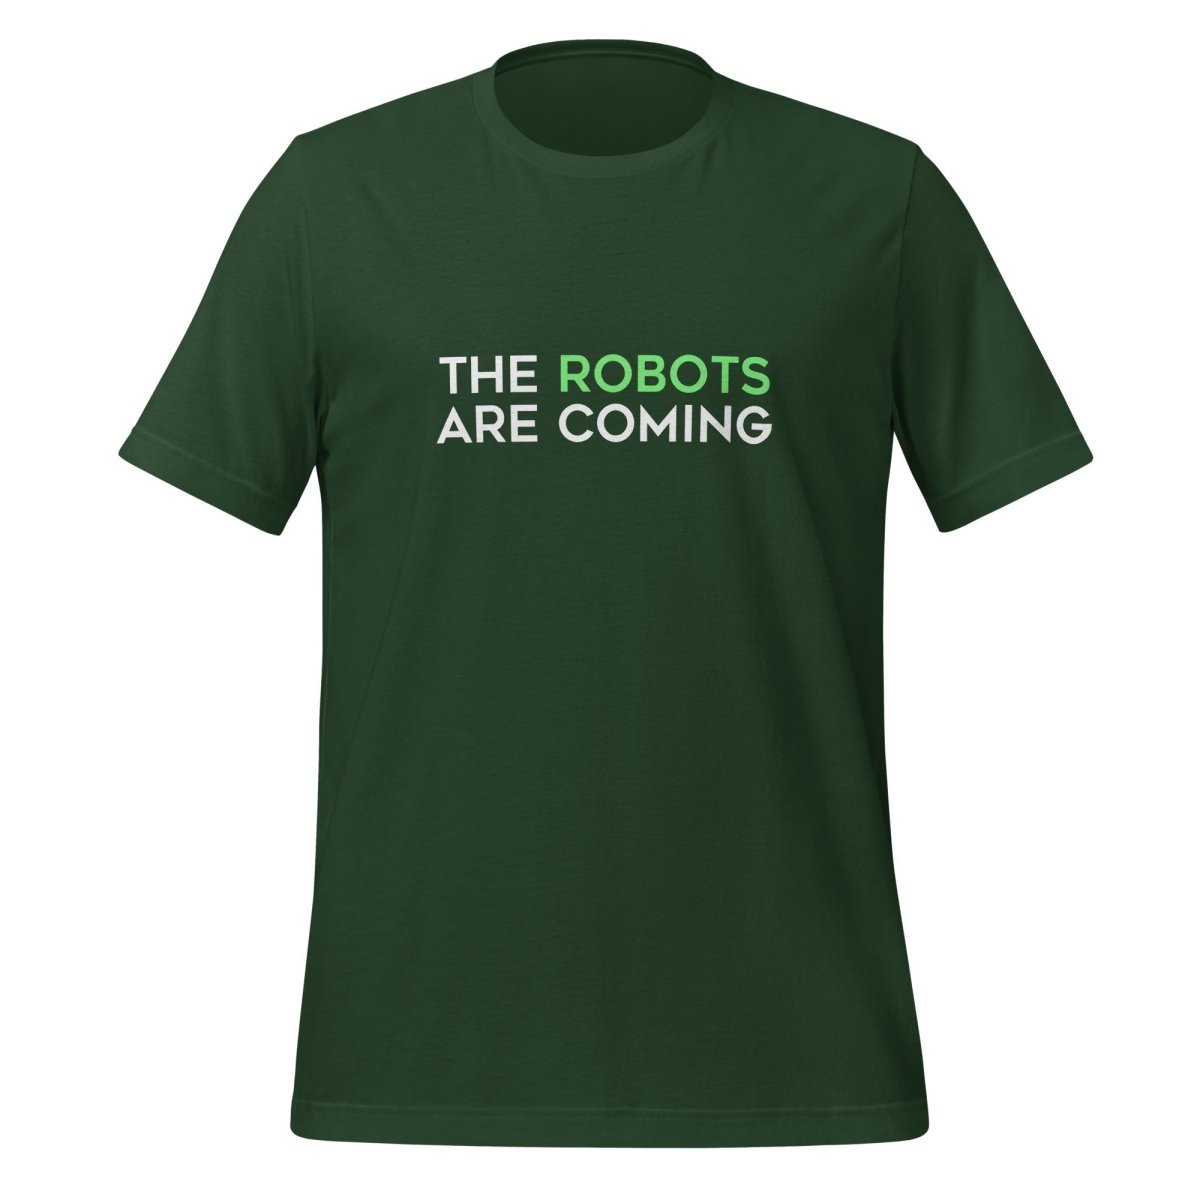 The Robots Are Coming (Green) T - Shirt 1 (unisex) - Forest - AI Store